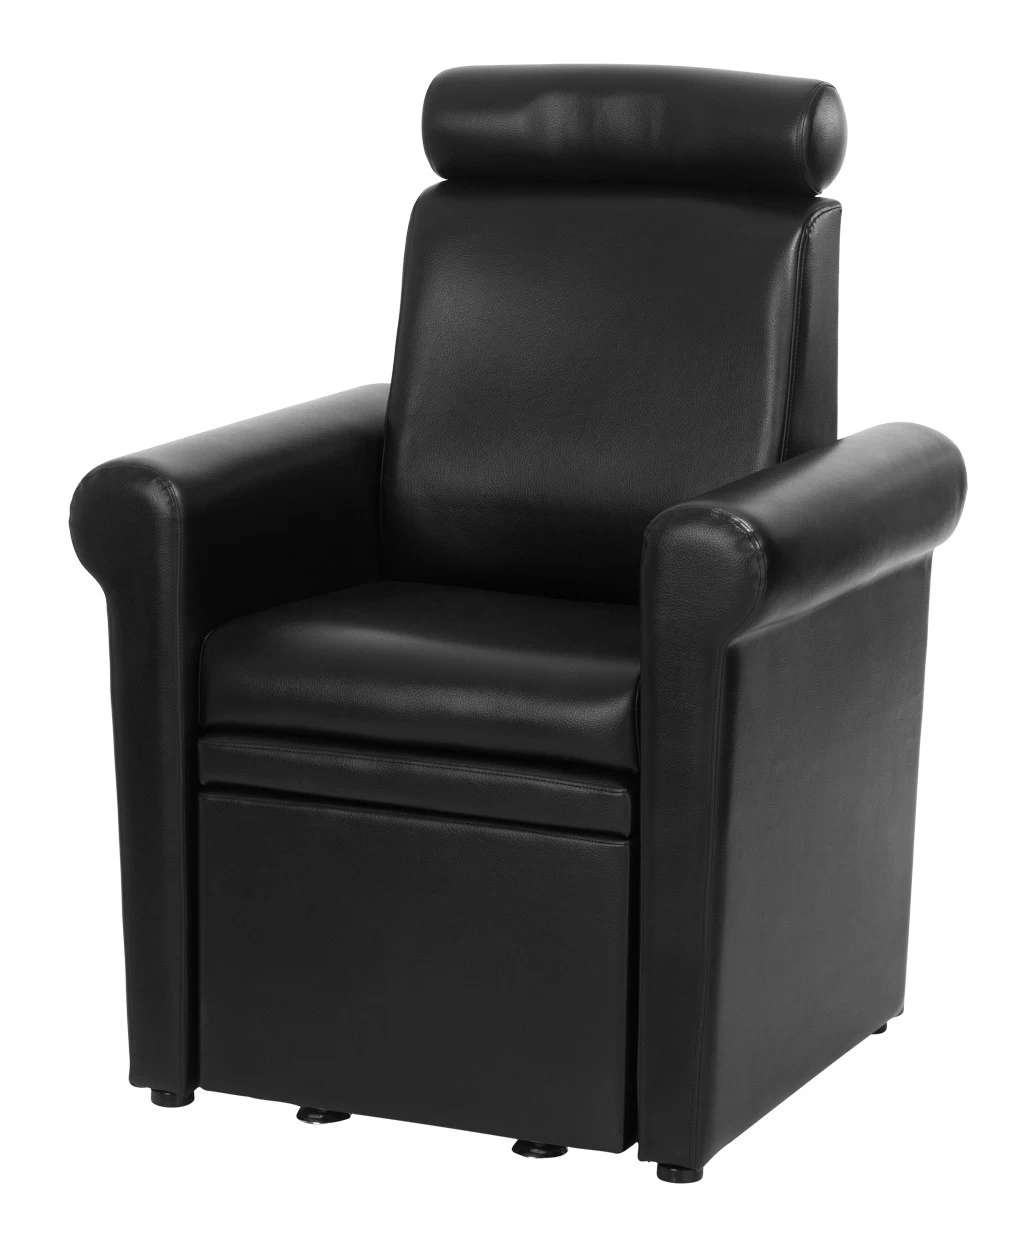 pedicure chair manufacturer china with pedicure spa chair supplier china for pedicure massage chair factory